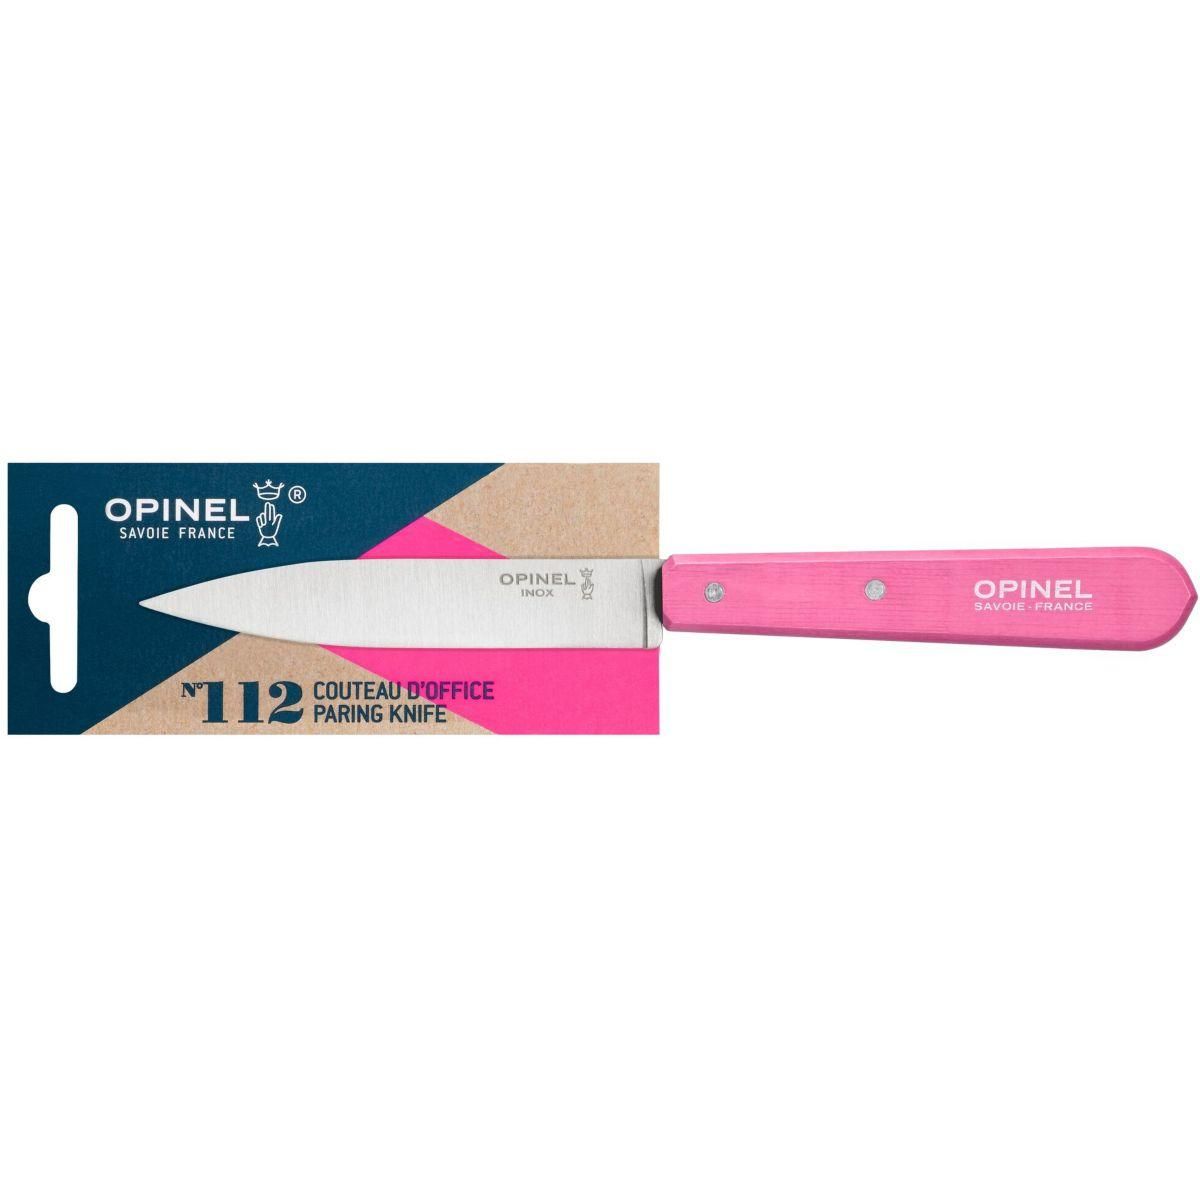 Opinel Couteau d'office No112 fuchsia